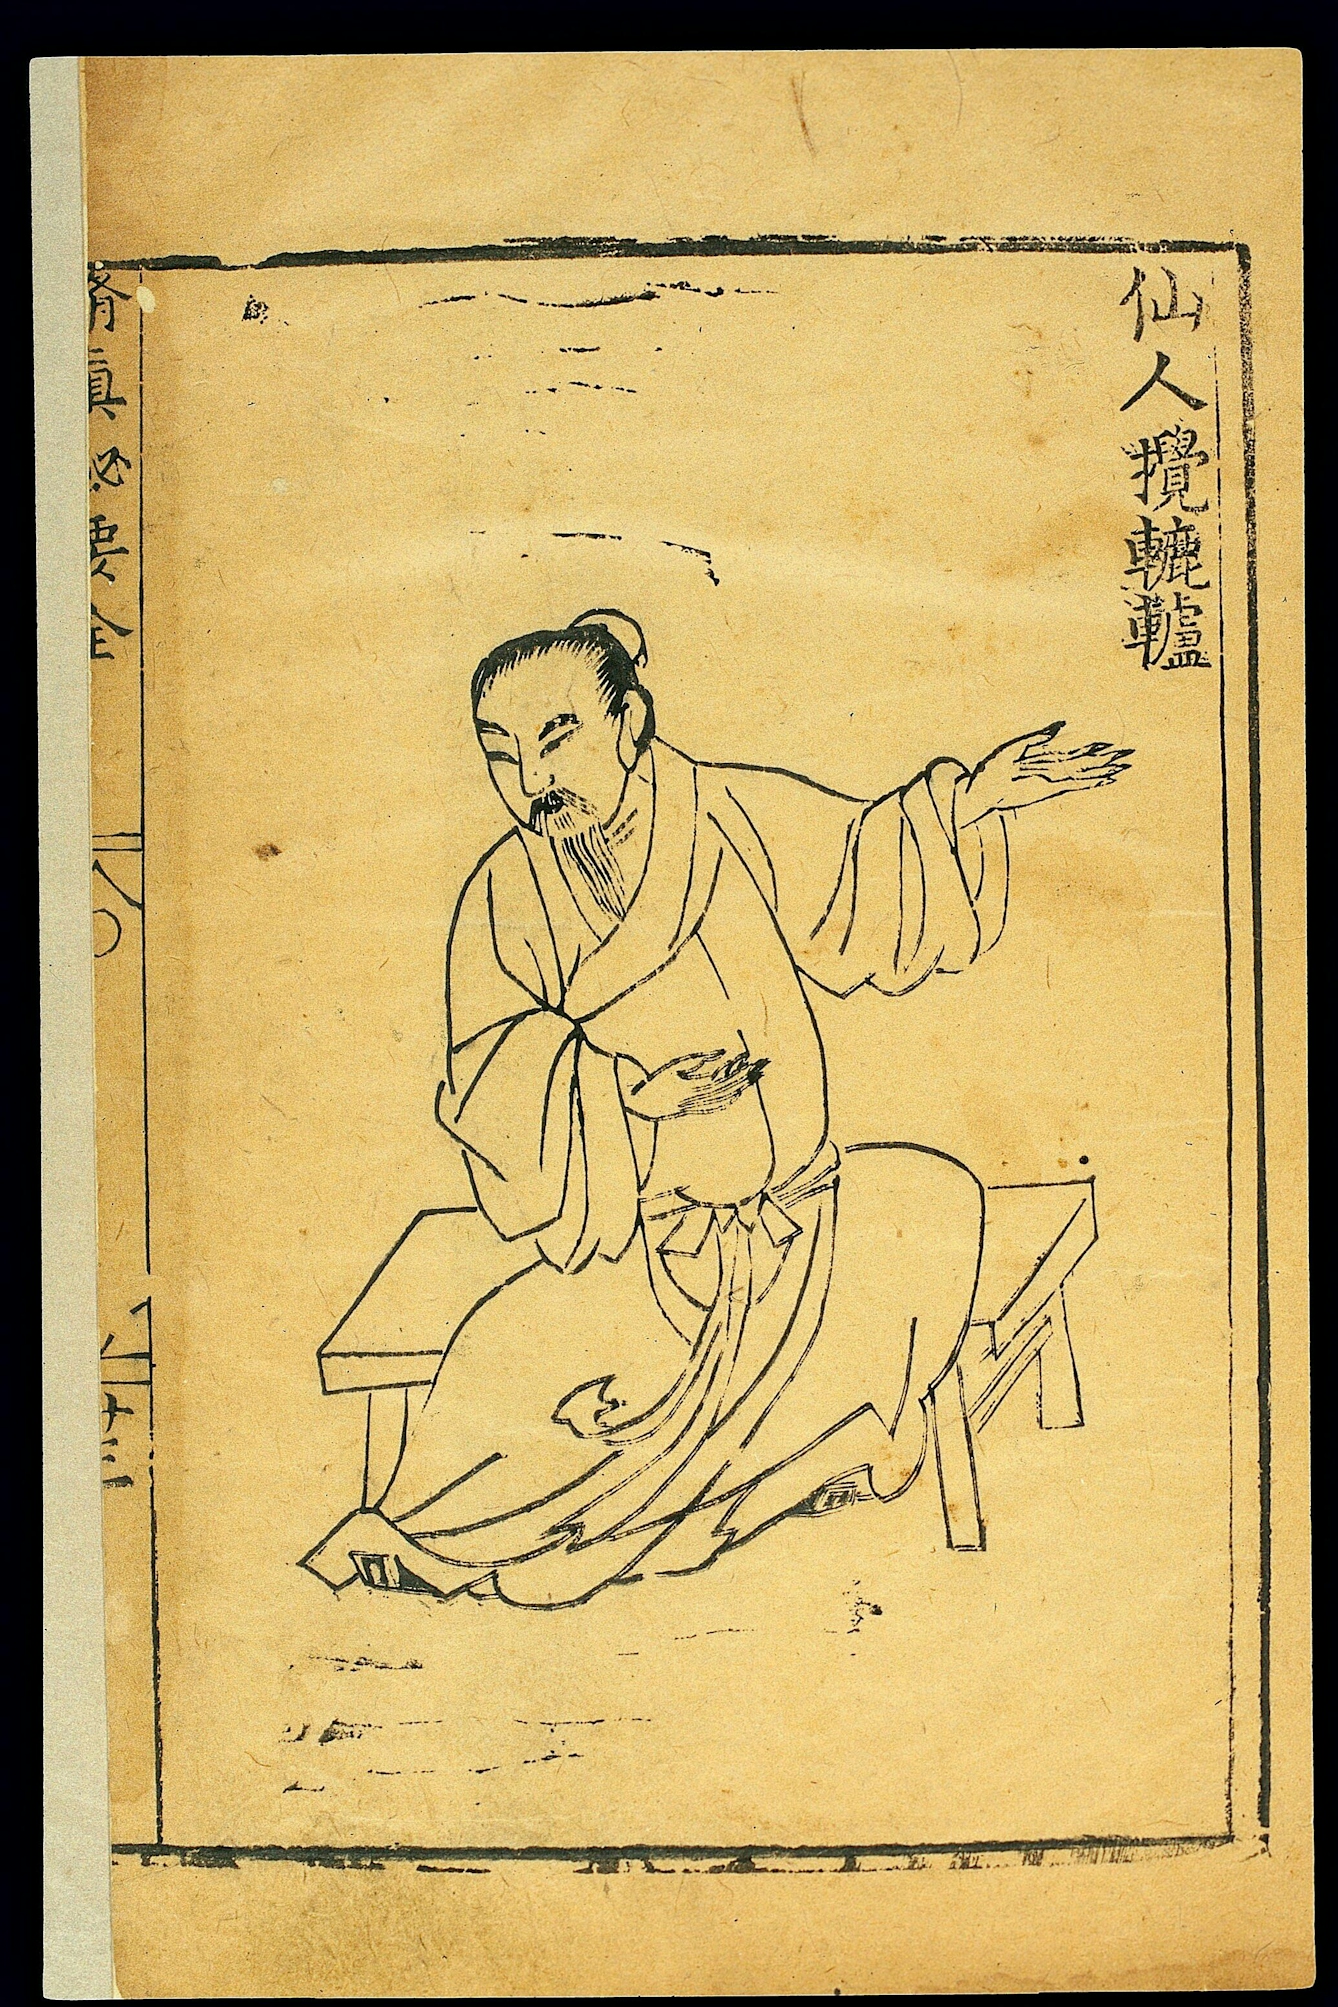 An illustration on yellowed paper showing a man in a robe with slicked back black hair, a moustache and a beard. He is sat upright on a bench, and both his arms are slightly outstretched to his left. 